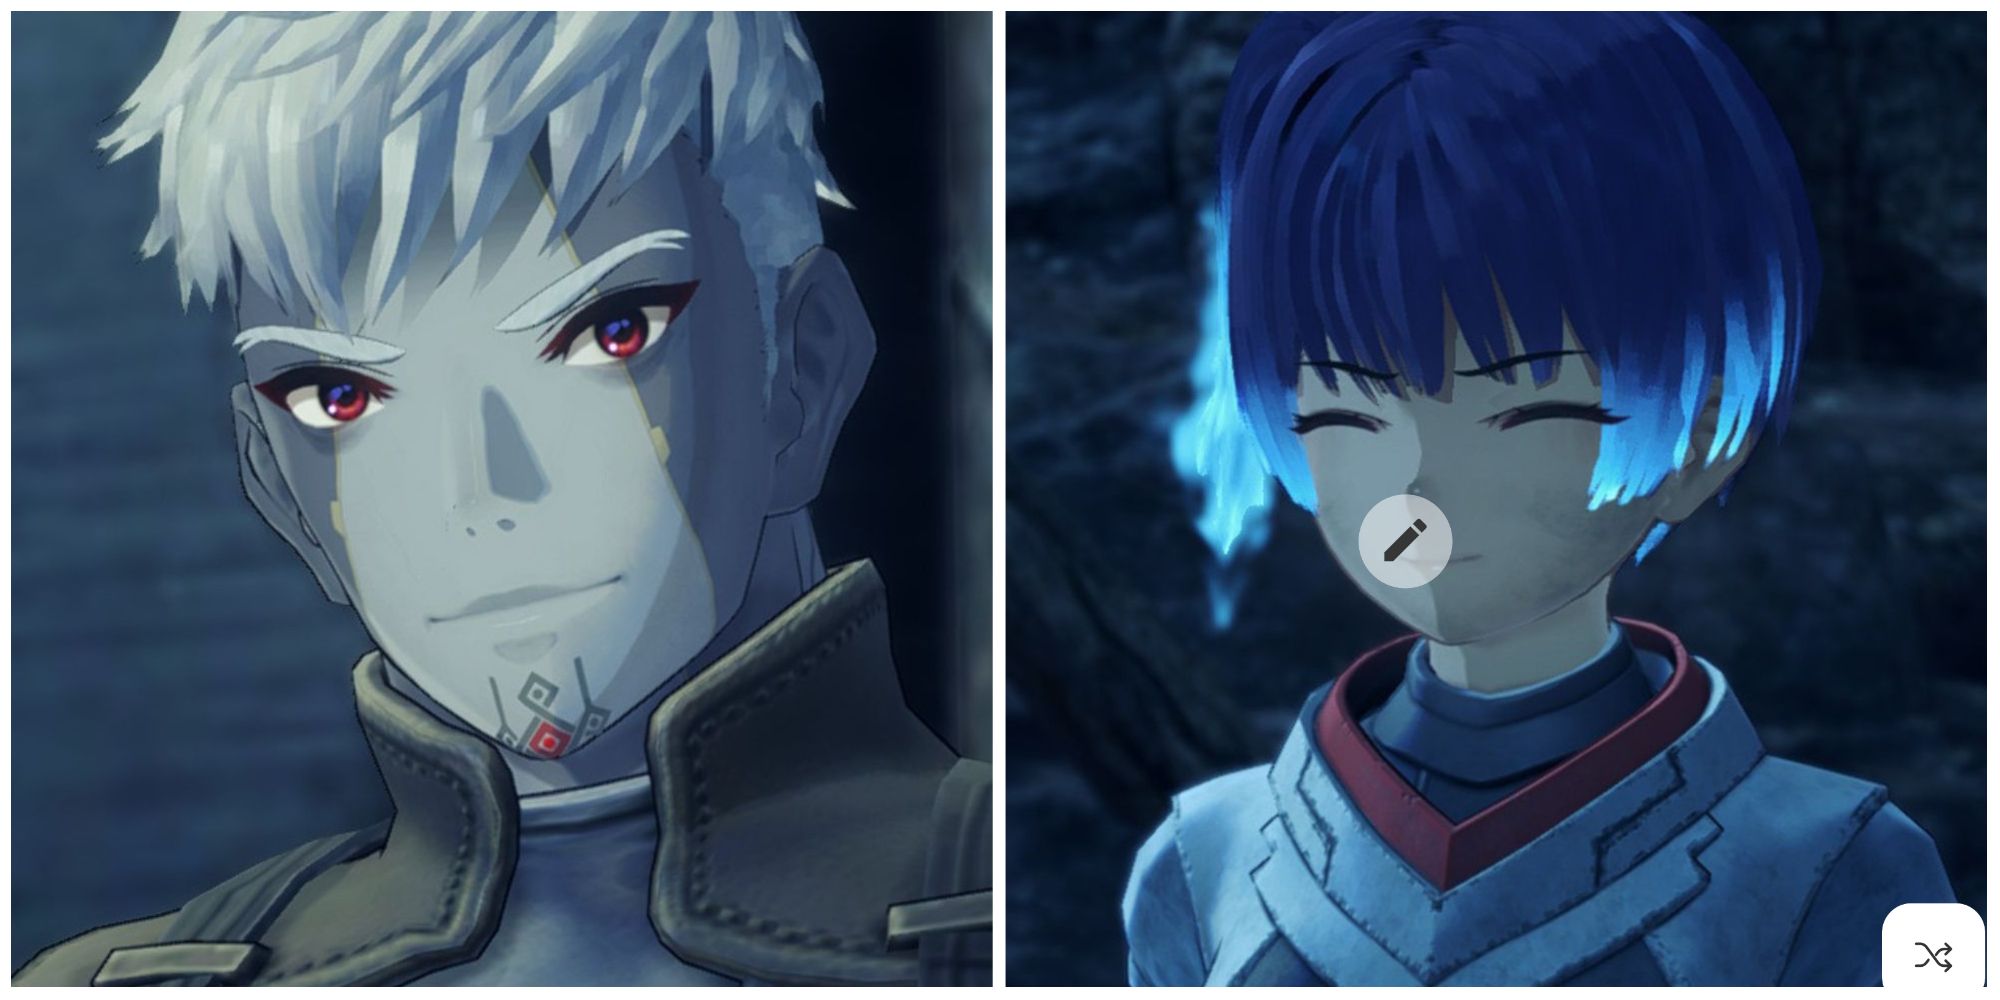 a split image of Lanz and Sena from Xenoblade Chronicles 3 with a close up of Lanz on the left and a mid shot of Sena on the right